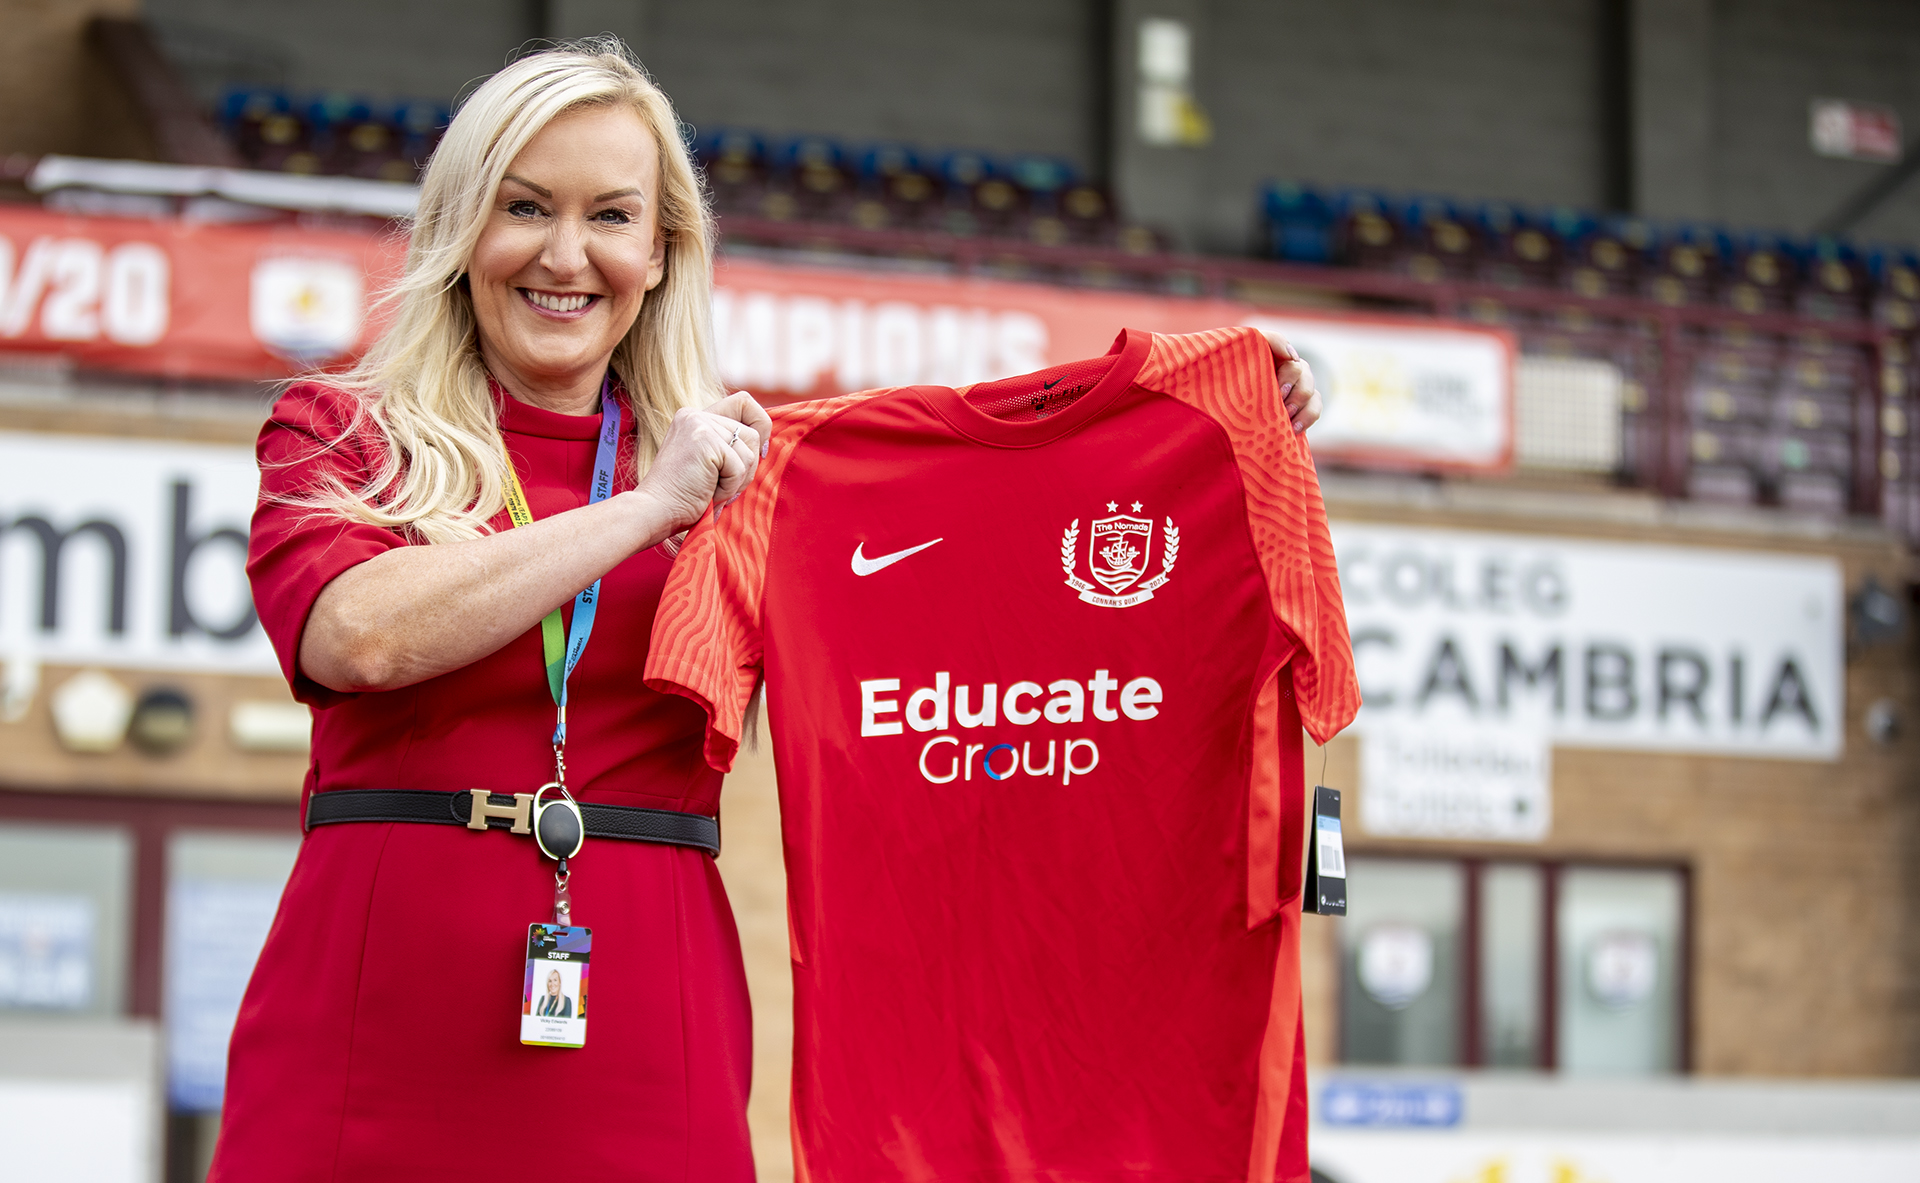 Victoria Edwards (Vice Principal Technical Studies at Coleg Cambria) with the new Connah's Quay Nomads home shirt at Deeside Stadium